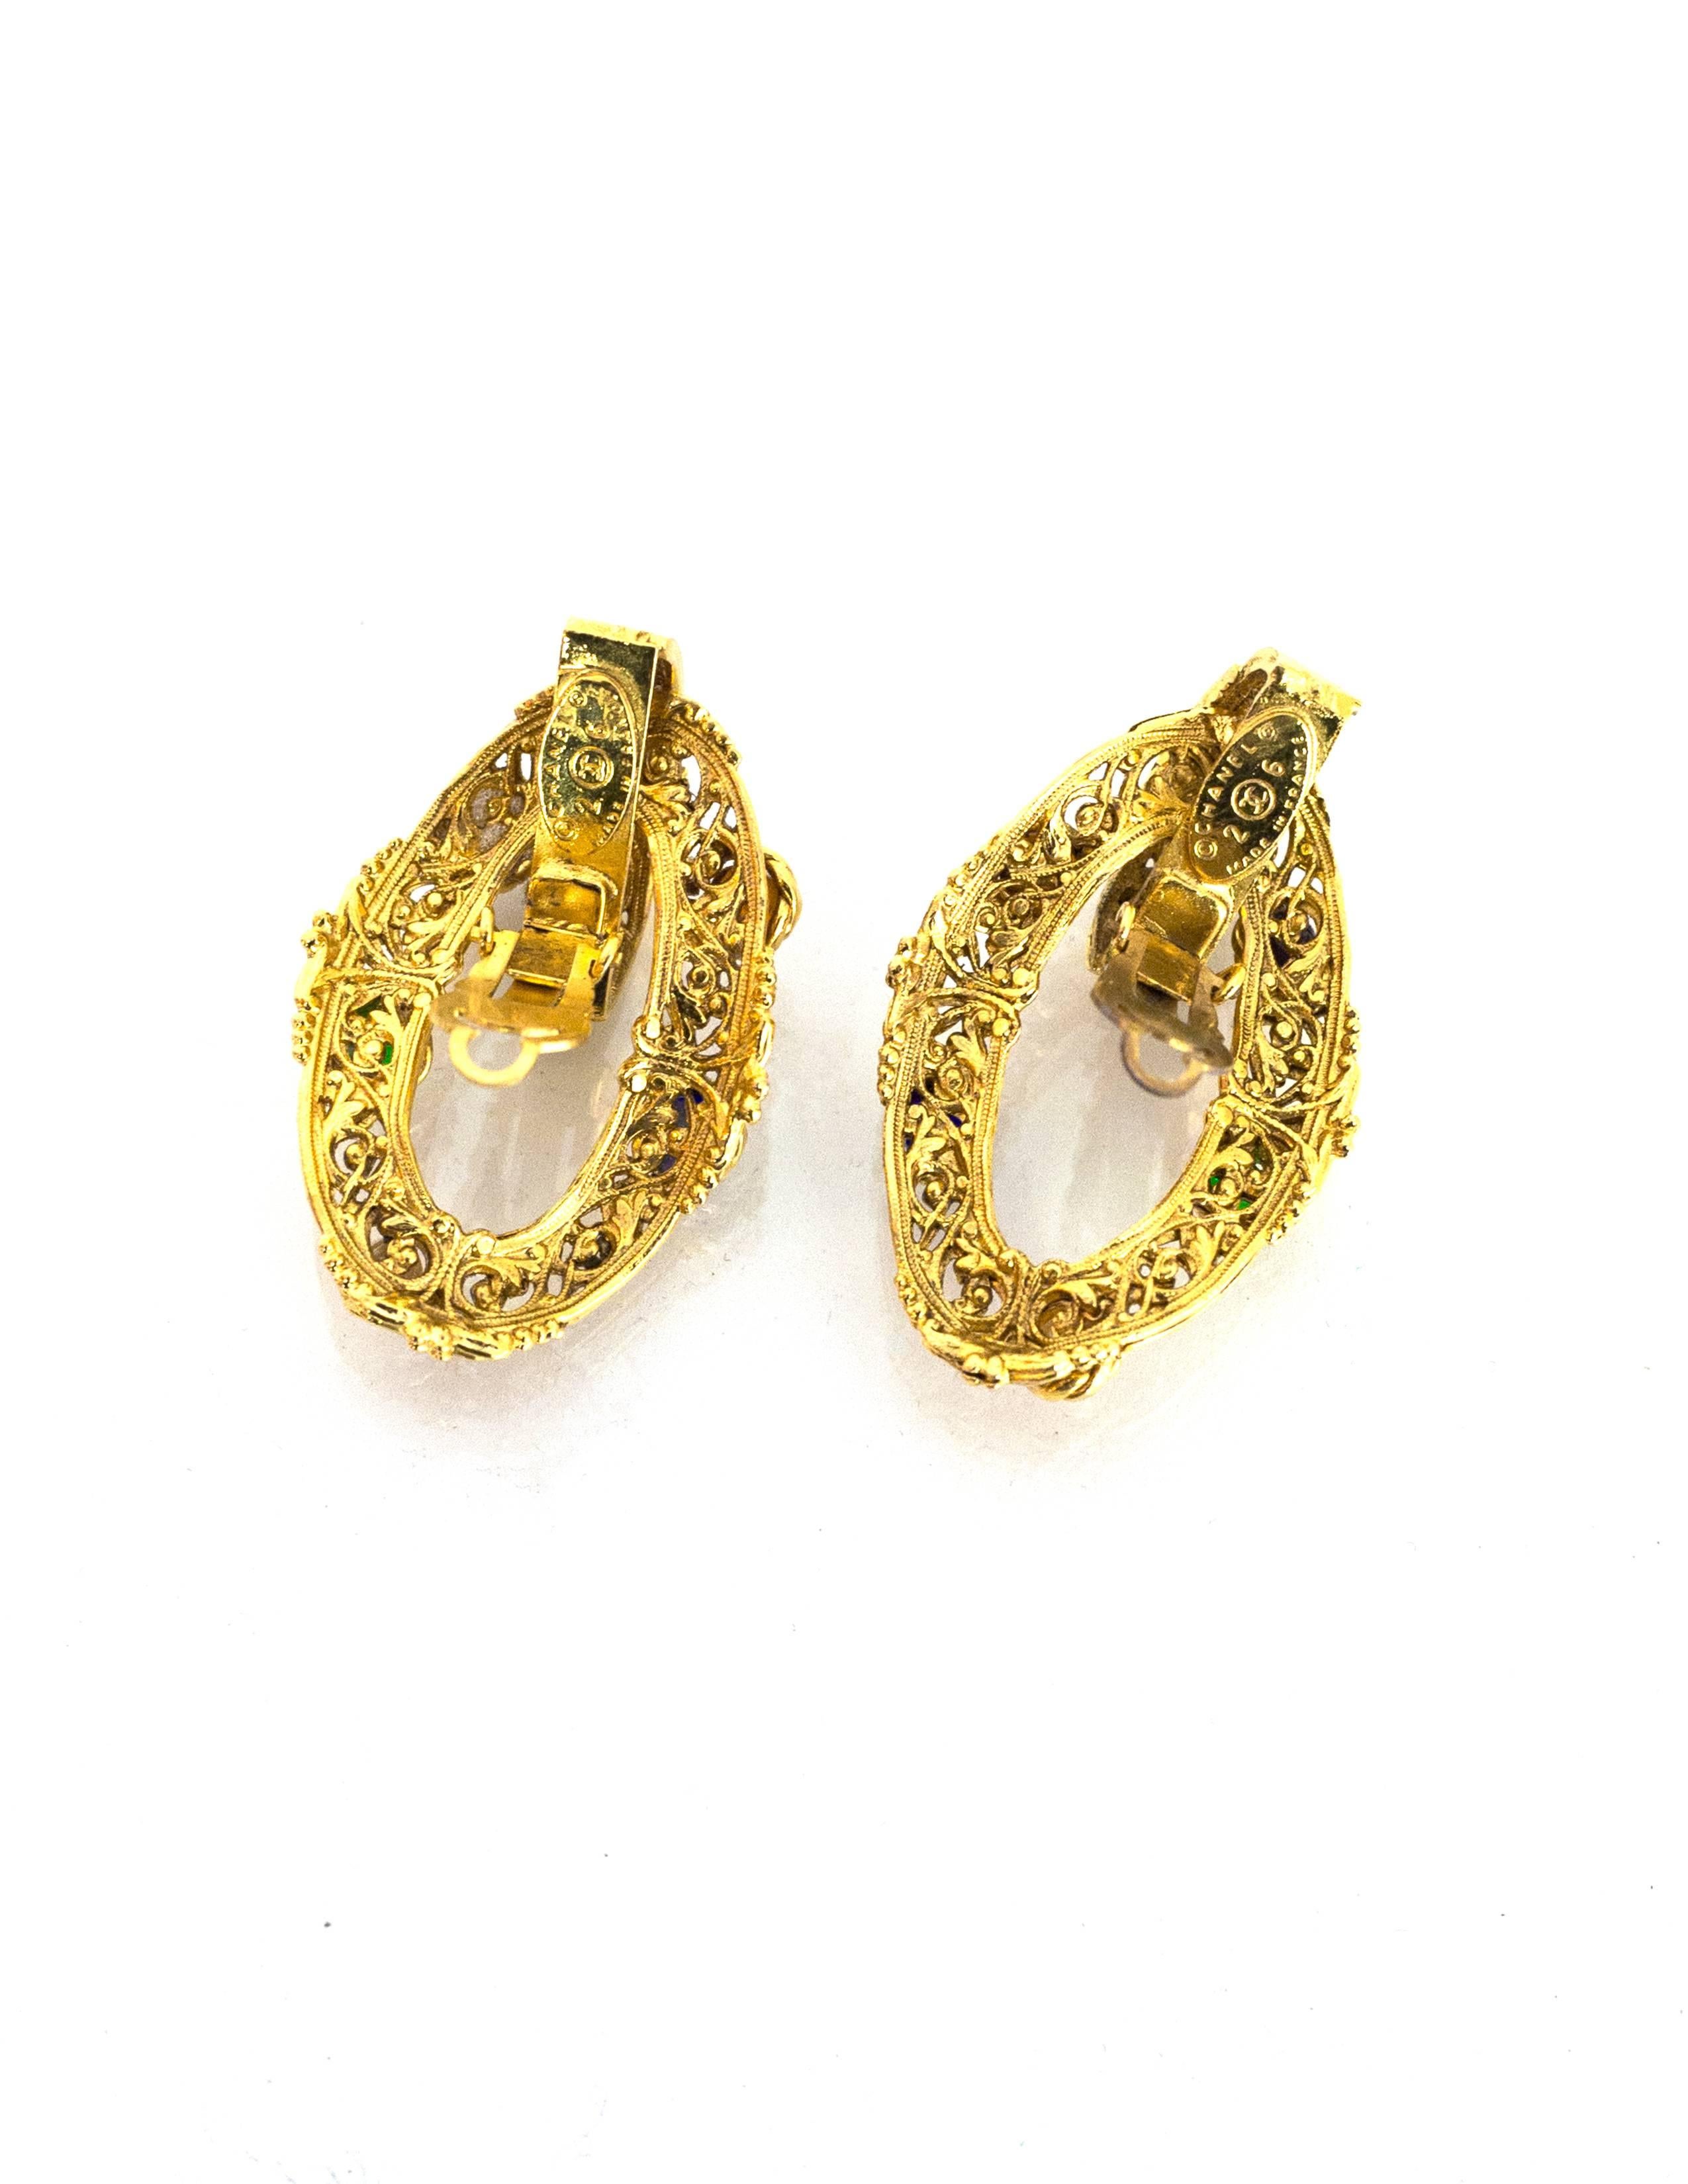 Chanel Goldtone & Gripoix Filigree Clip-On Earrings

Made In: France
Year of Production: 1987
Color: Gold
Materials: Metal, gripoix
Closure: Clip on
Stamp: Chanel 2 CC 6 Made In France
Overall Condition: Excellent pre-owned vintage condition